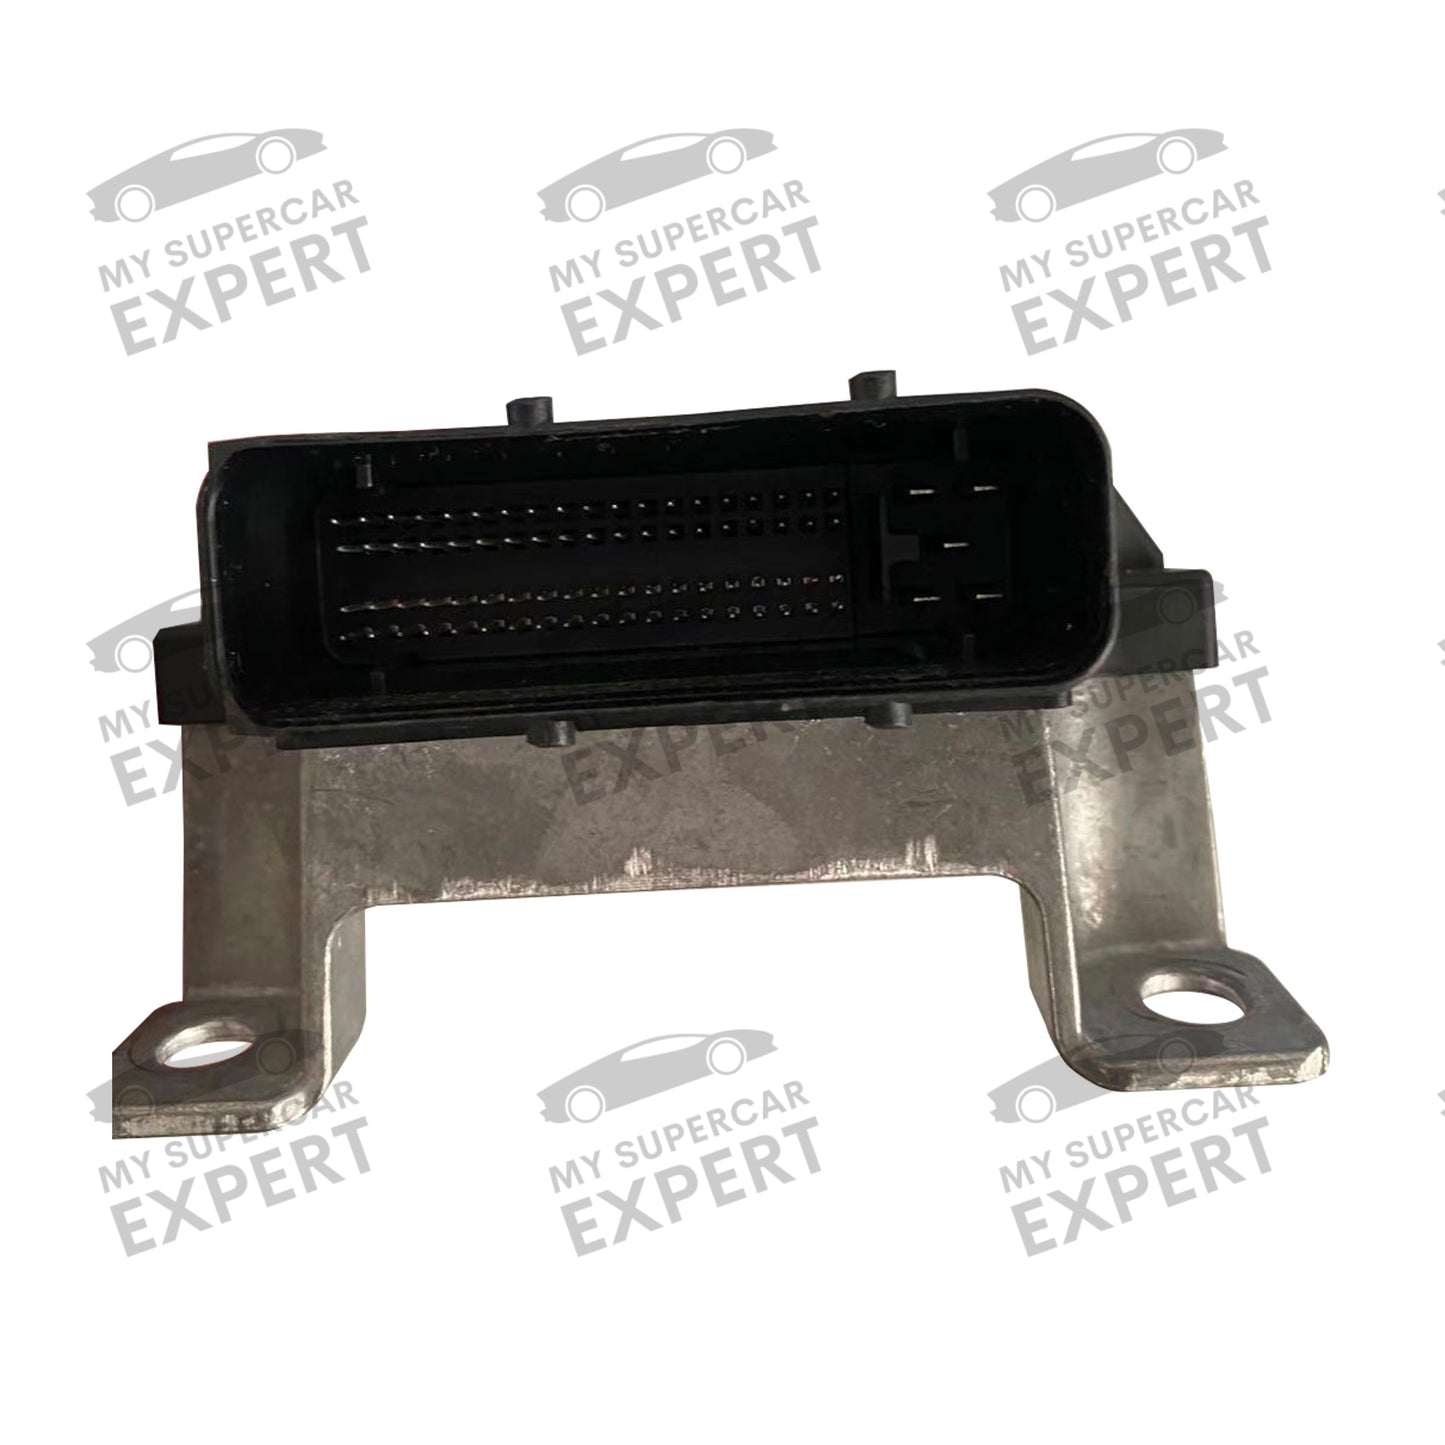 Volkswagen VW Touareg Continental Chassis Control EFP 4M0907777B A2C7674370200 Б/у